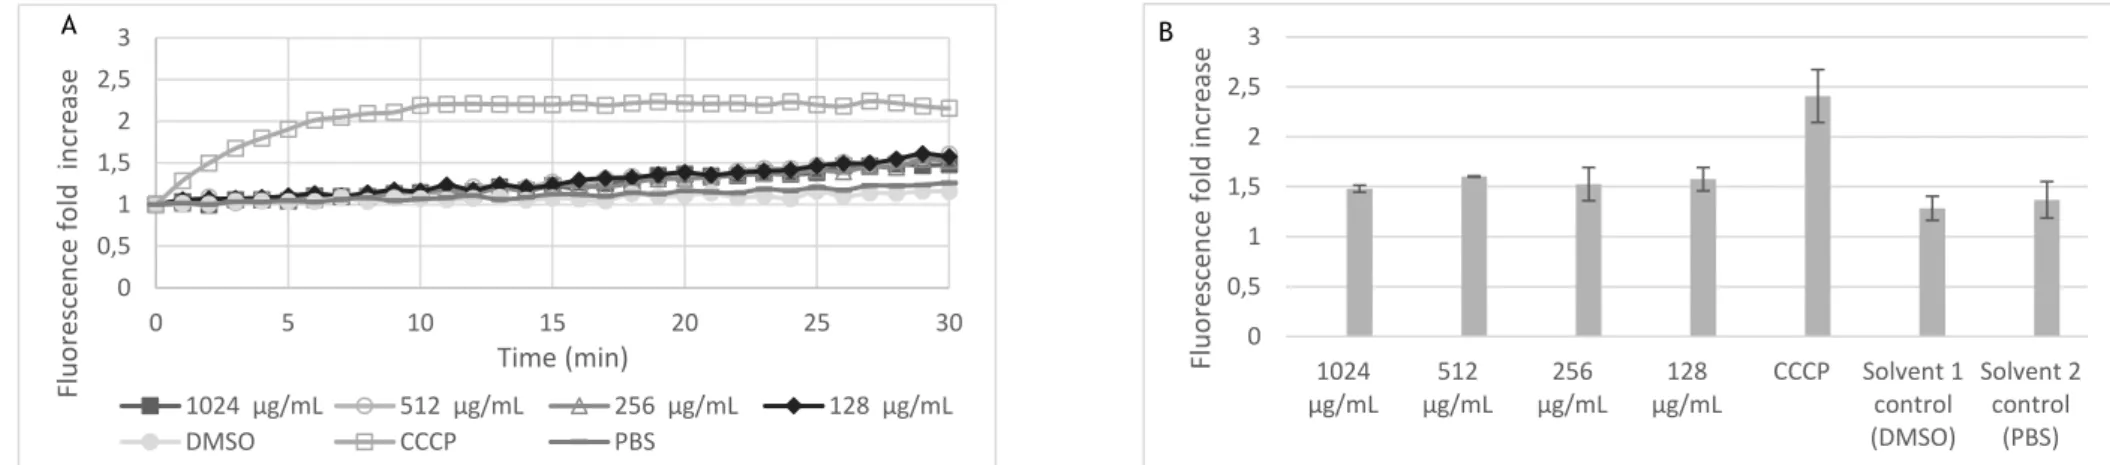 Figure 9. Ethidium bromide accumulation assay for DQ46M1 strain in the presence of sub-inhibitory concentrations of (-)-epicatechin over 30 minutes (A) and at 30 minutes  (B)